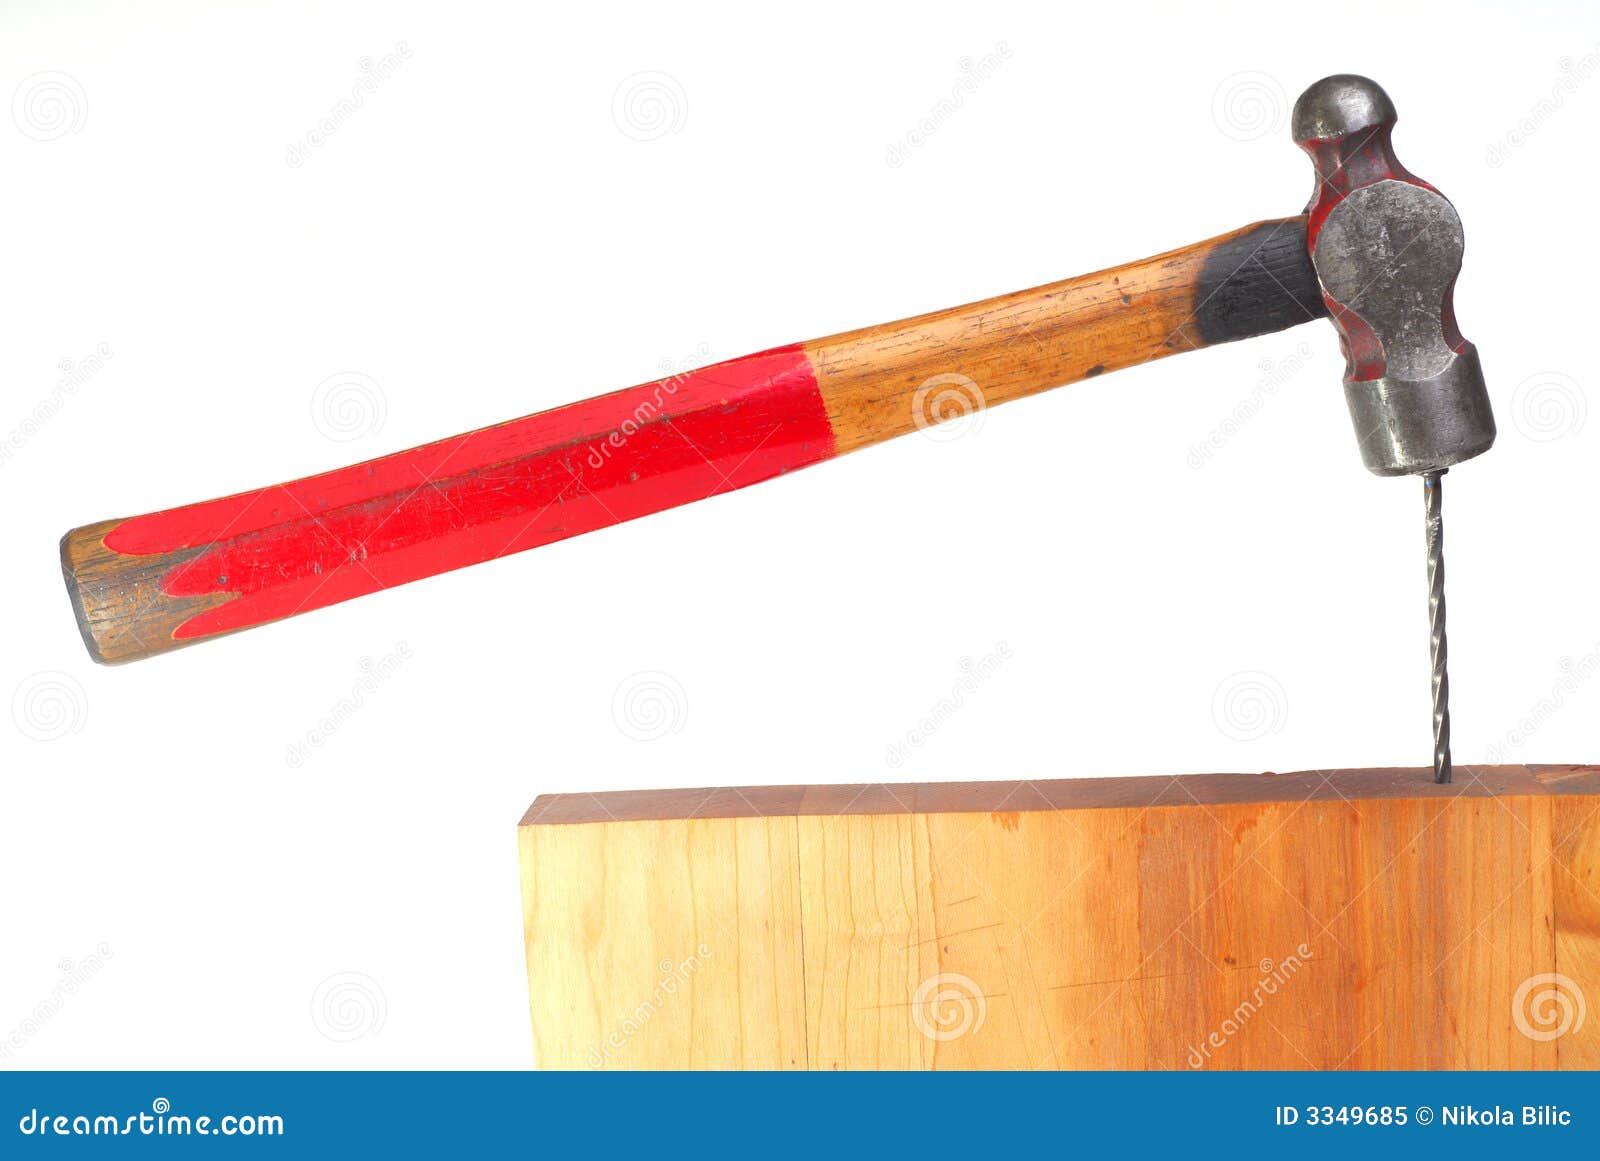 Hammer just hit nail isolated on white background